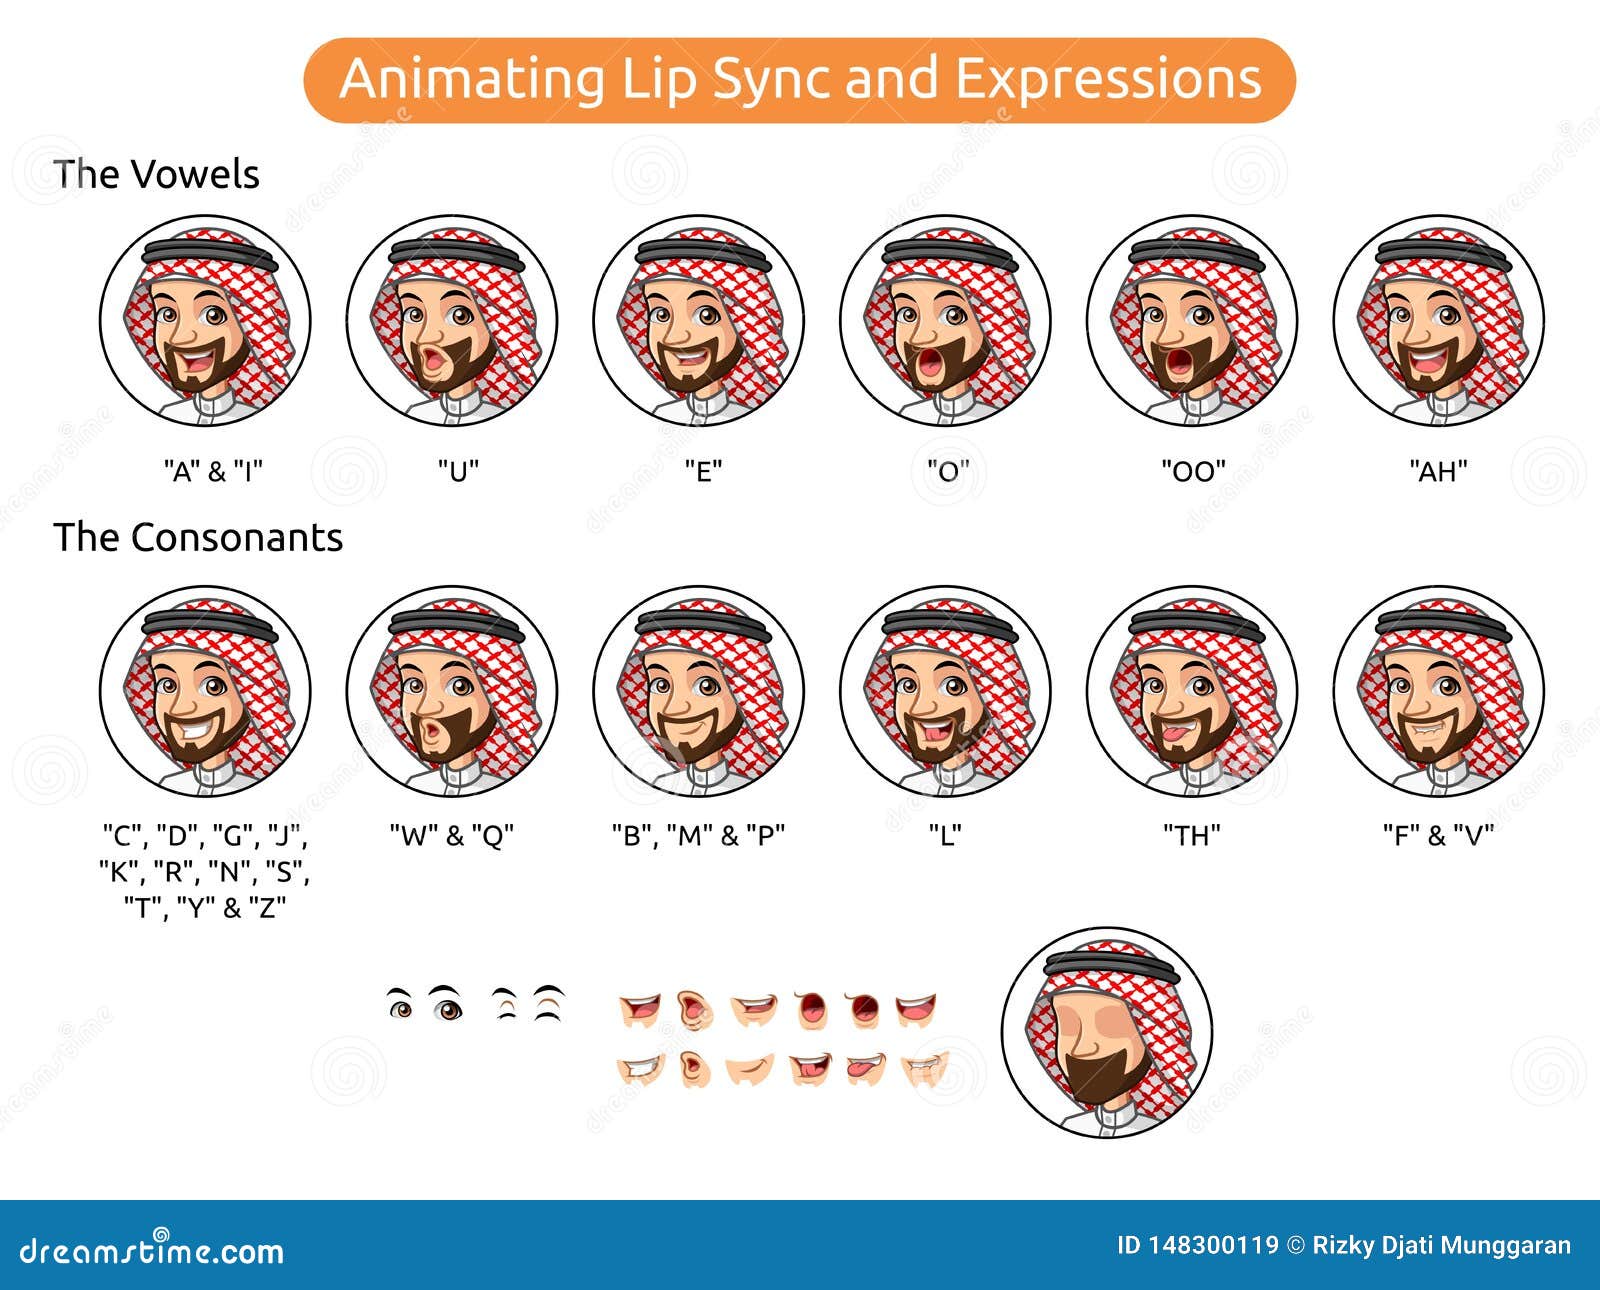 Saudi Arab Man Cartoon Character For Animating Lip Sync And Expressions Stock Vector Illustration Of Emotion Constructor